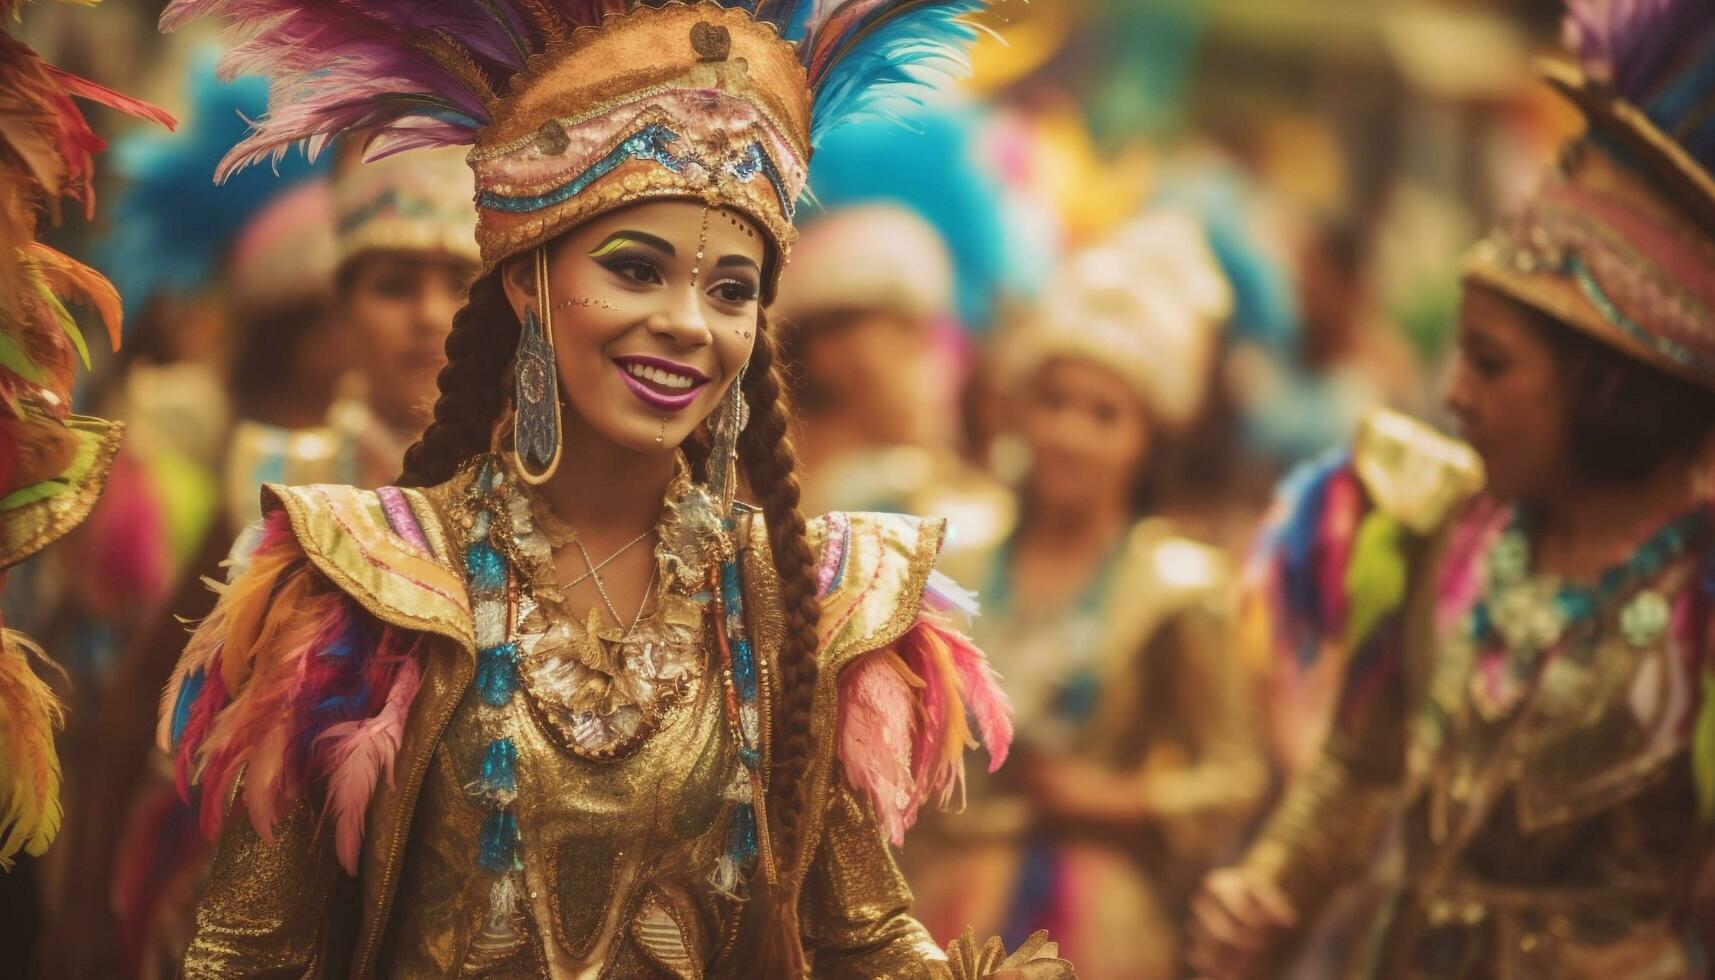 Smiling women in traditional clothing dance samba at Brazilian carnival generated by AI photo